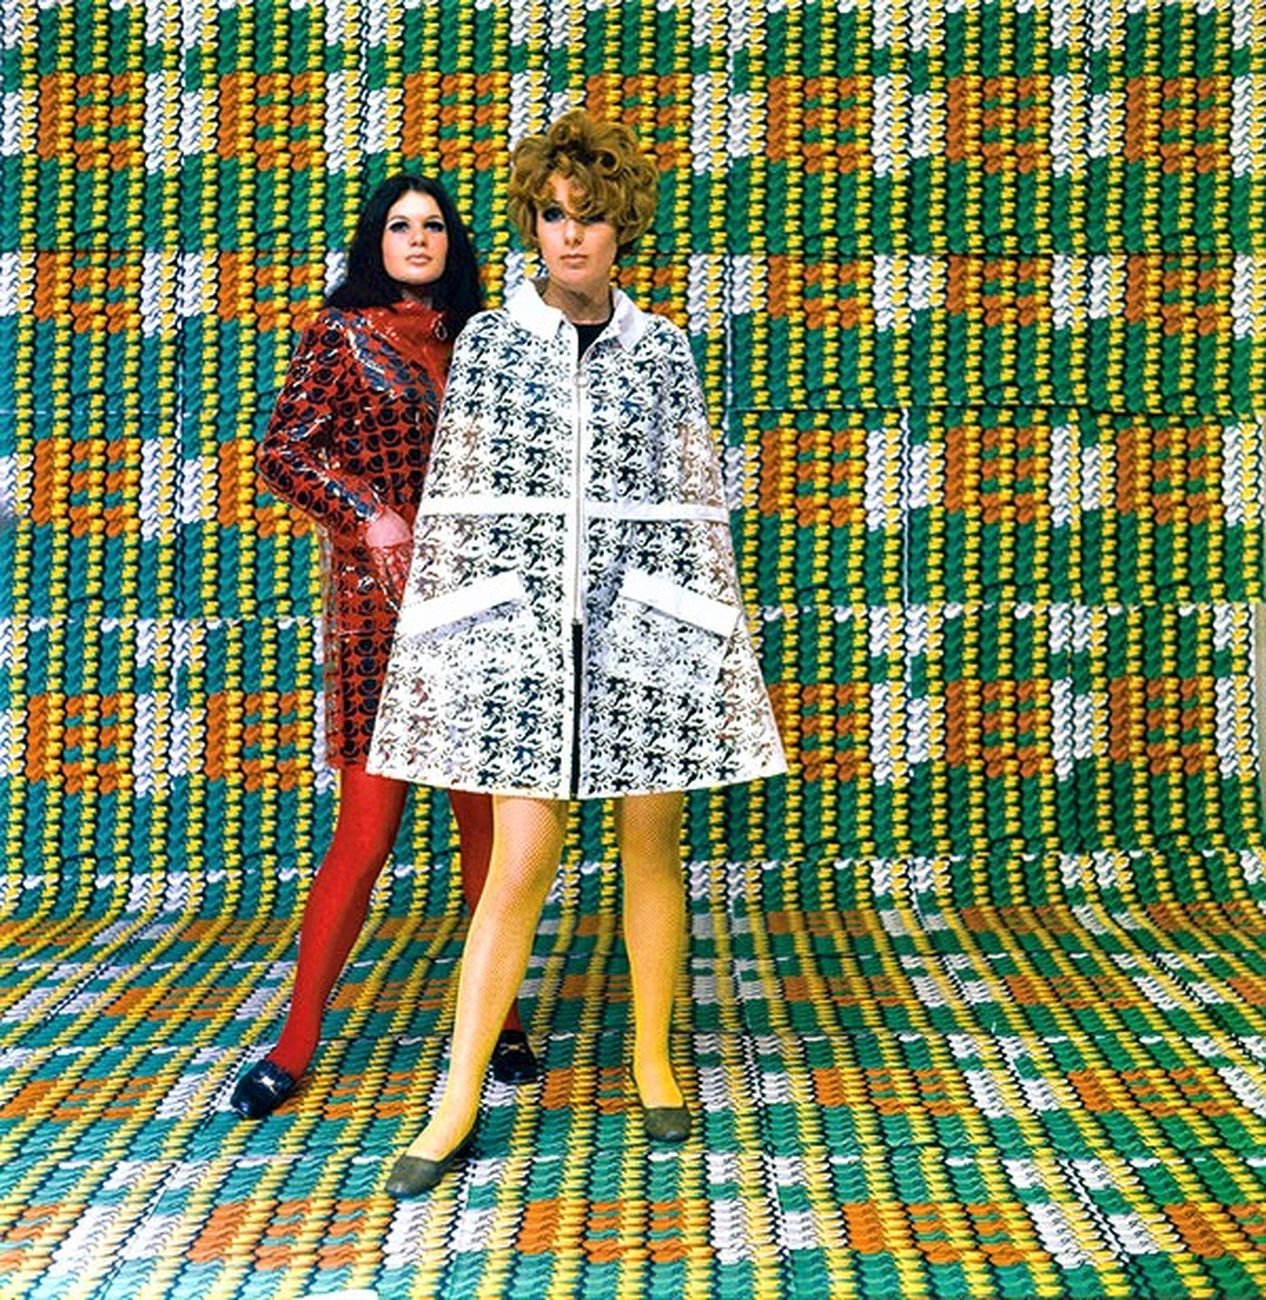 Models wearing coats designed by Lukowski + Ohanian with textile pattern by Thomas Bayrle, Galleria Apollinaire, Milano 1967–68. Photo Christian Roeder